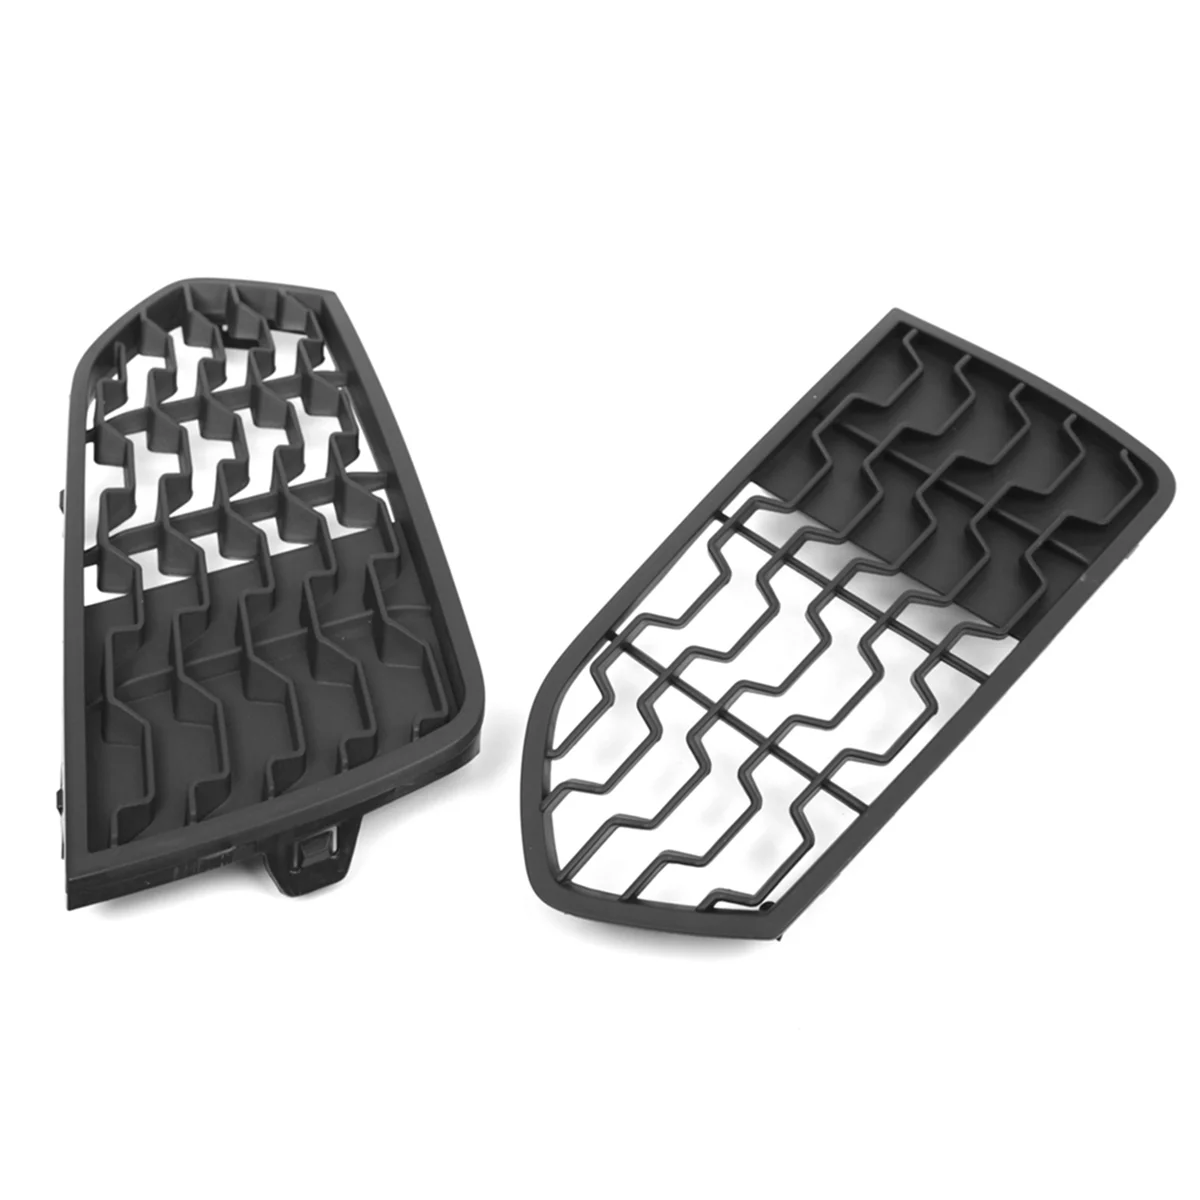 

51118056797 51118056798 Lower Mesh Grille Fog Lamp Frame Honeycomb Grille Automotive for BMW 2 Series F22 F23M 2013-2017